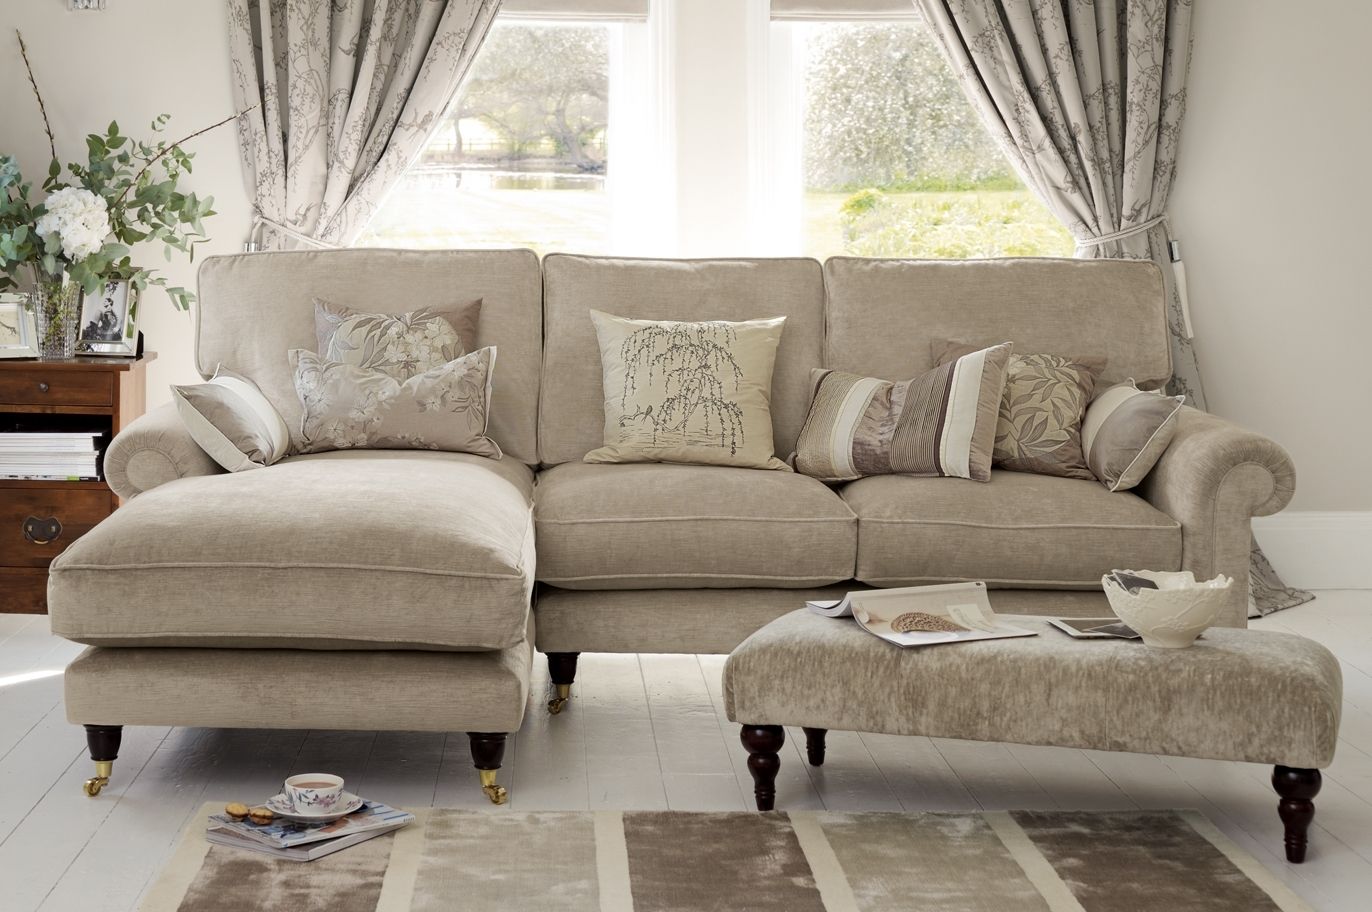 Kingston" Sectional Sofa With Chaise In Sable Beige From Laura Within Kingston Ontario Sectional Sofas (View 1 of 10)